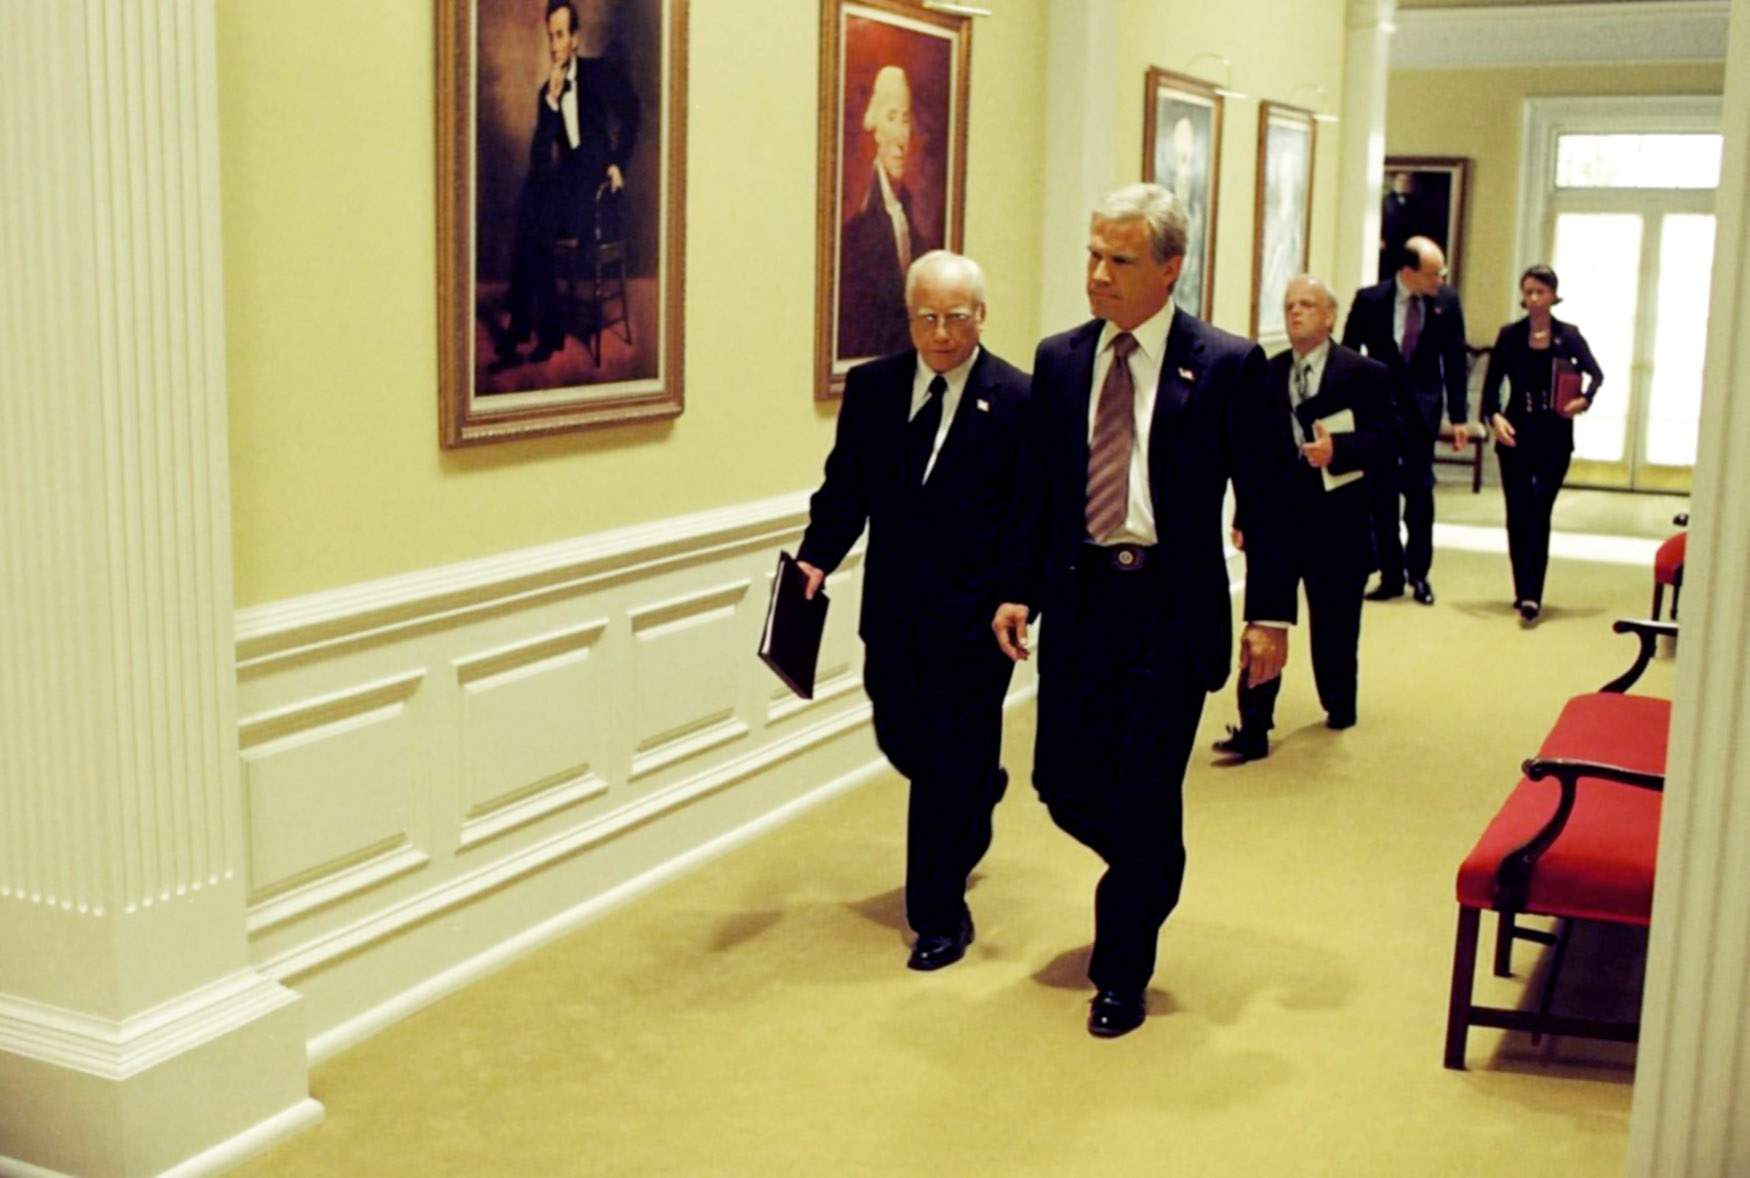 scene from the movie with characters walking in the hallway of the white house